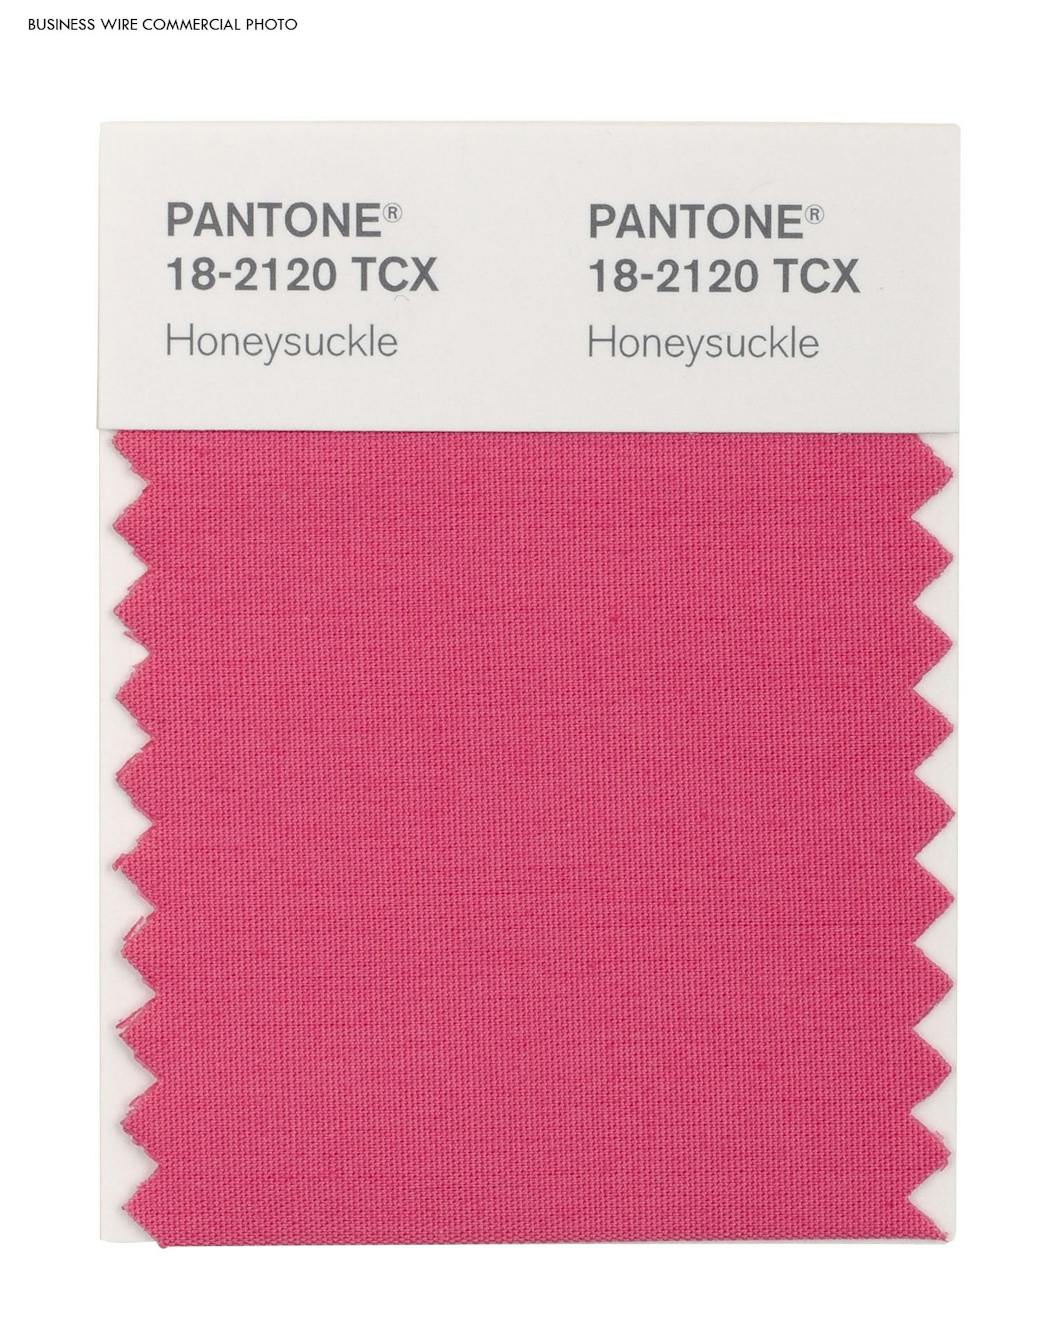 Pantone 18-2120 Honeysuckle, the 2011 color of the year.